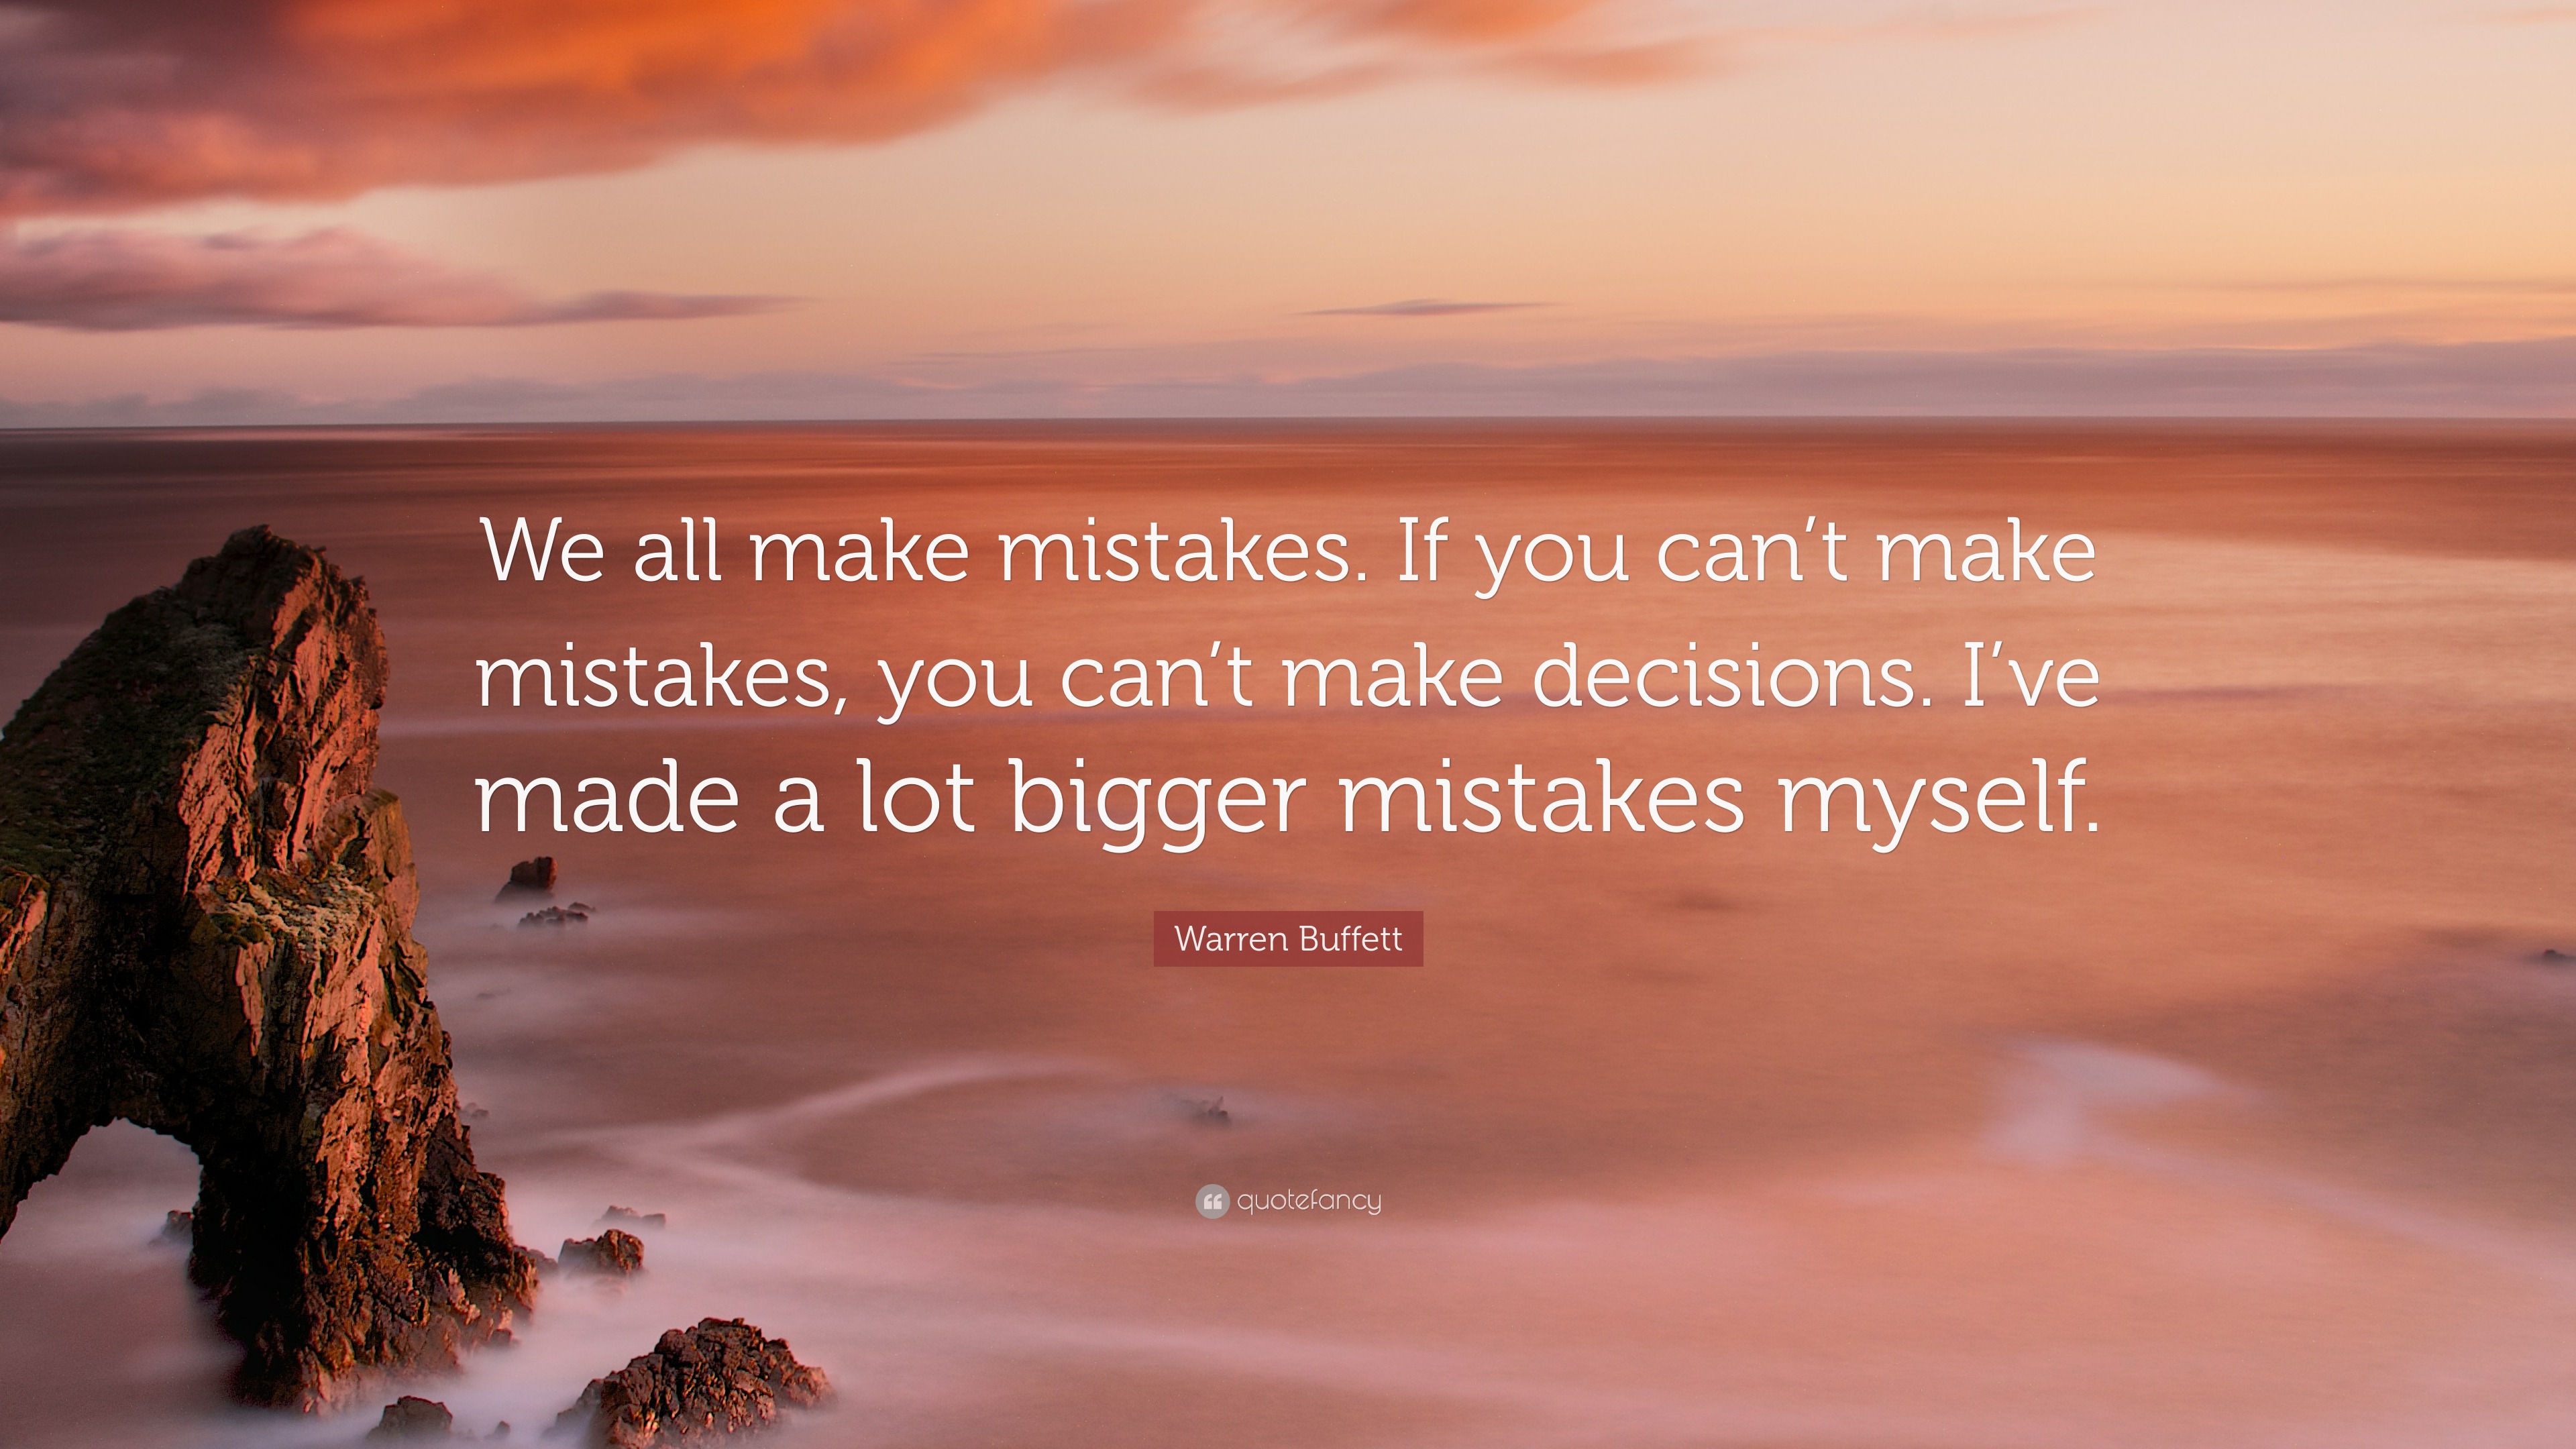 Warren Buffett Quote: "We all make mistakes. If you can't ...